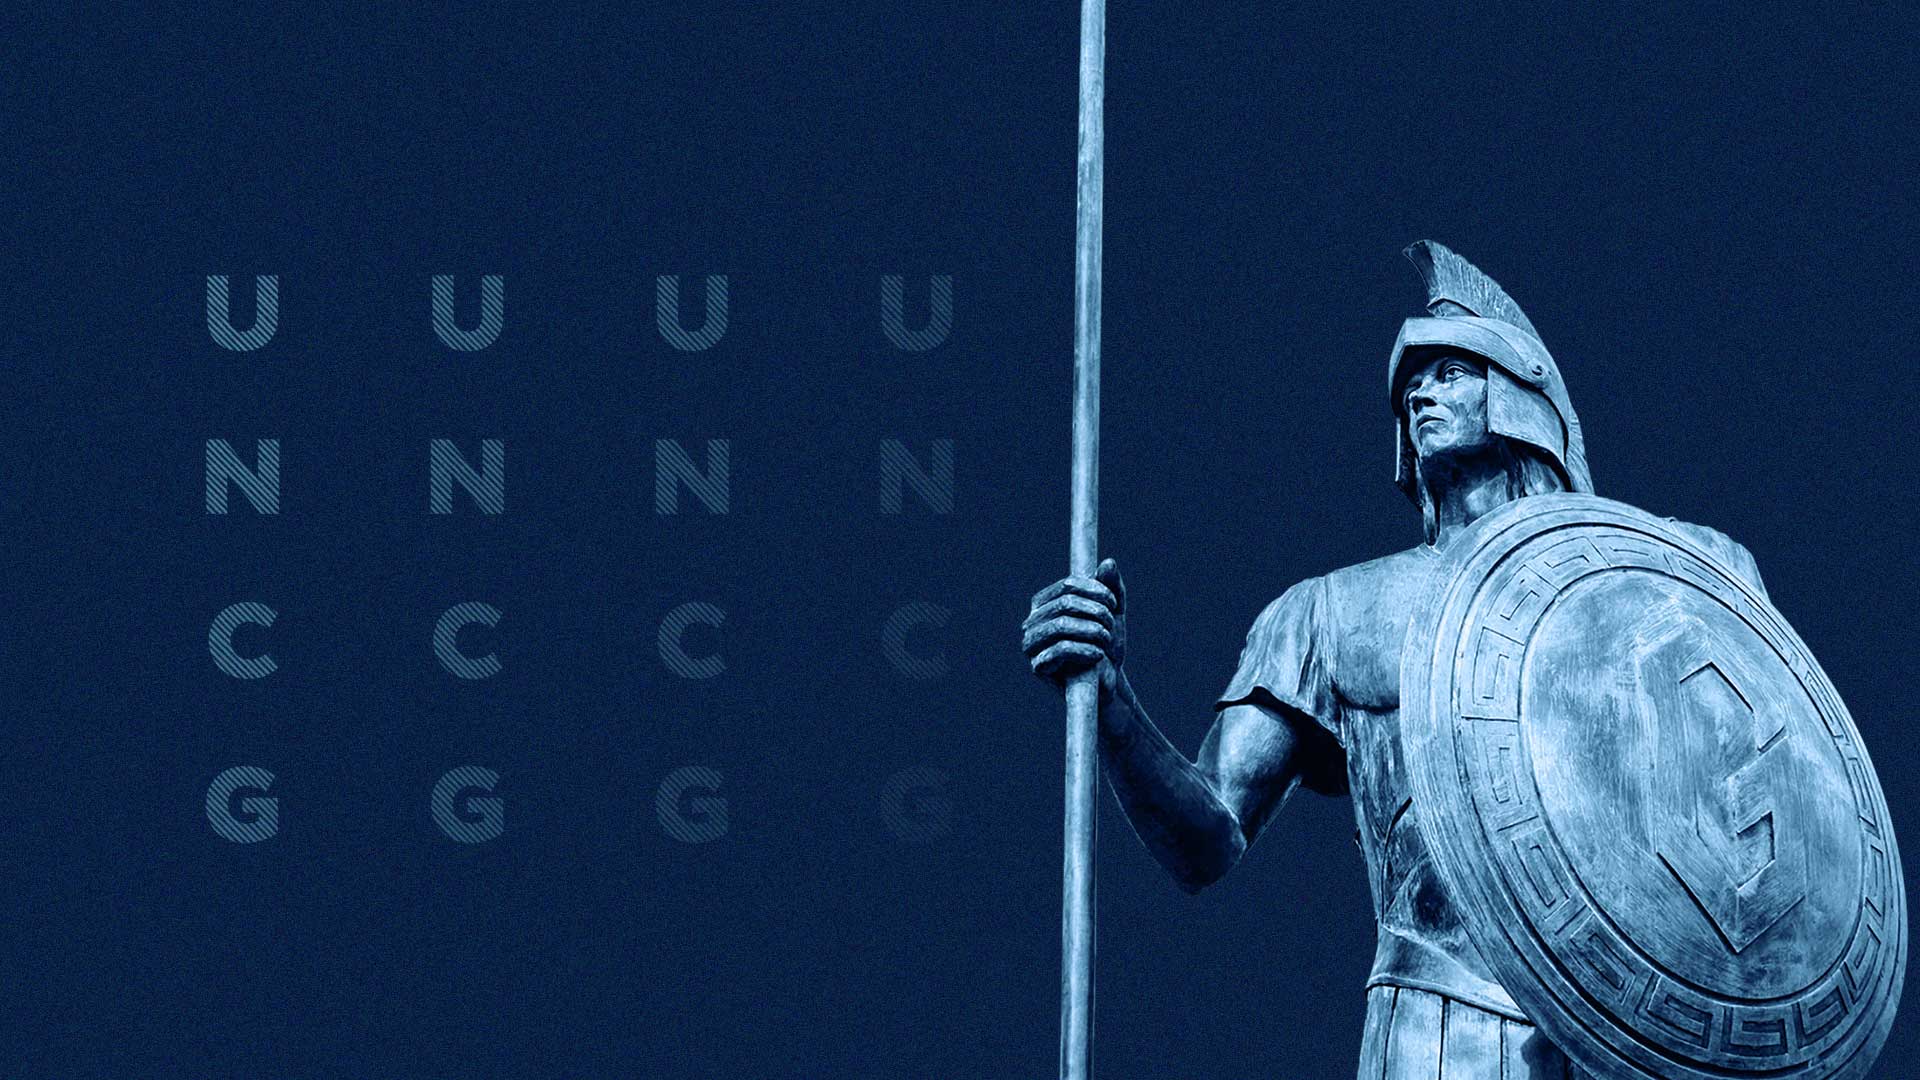 Wallpaper image Spartan statue on blue background with UNCG letters